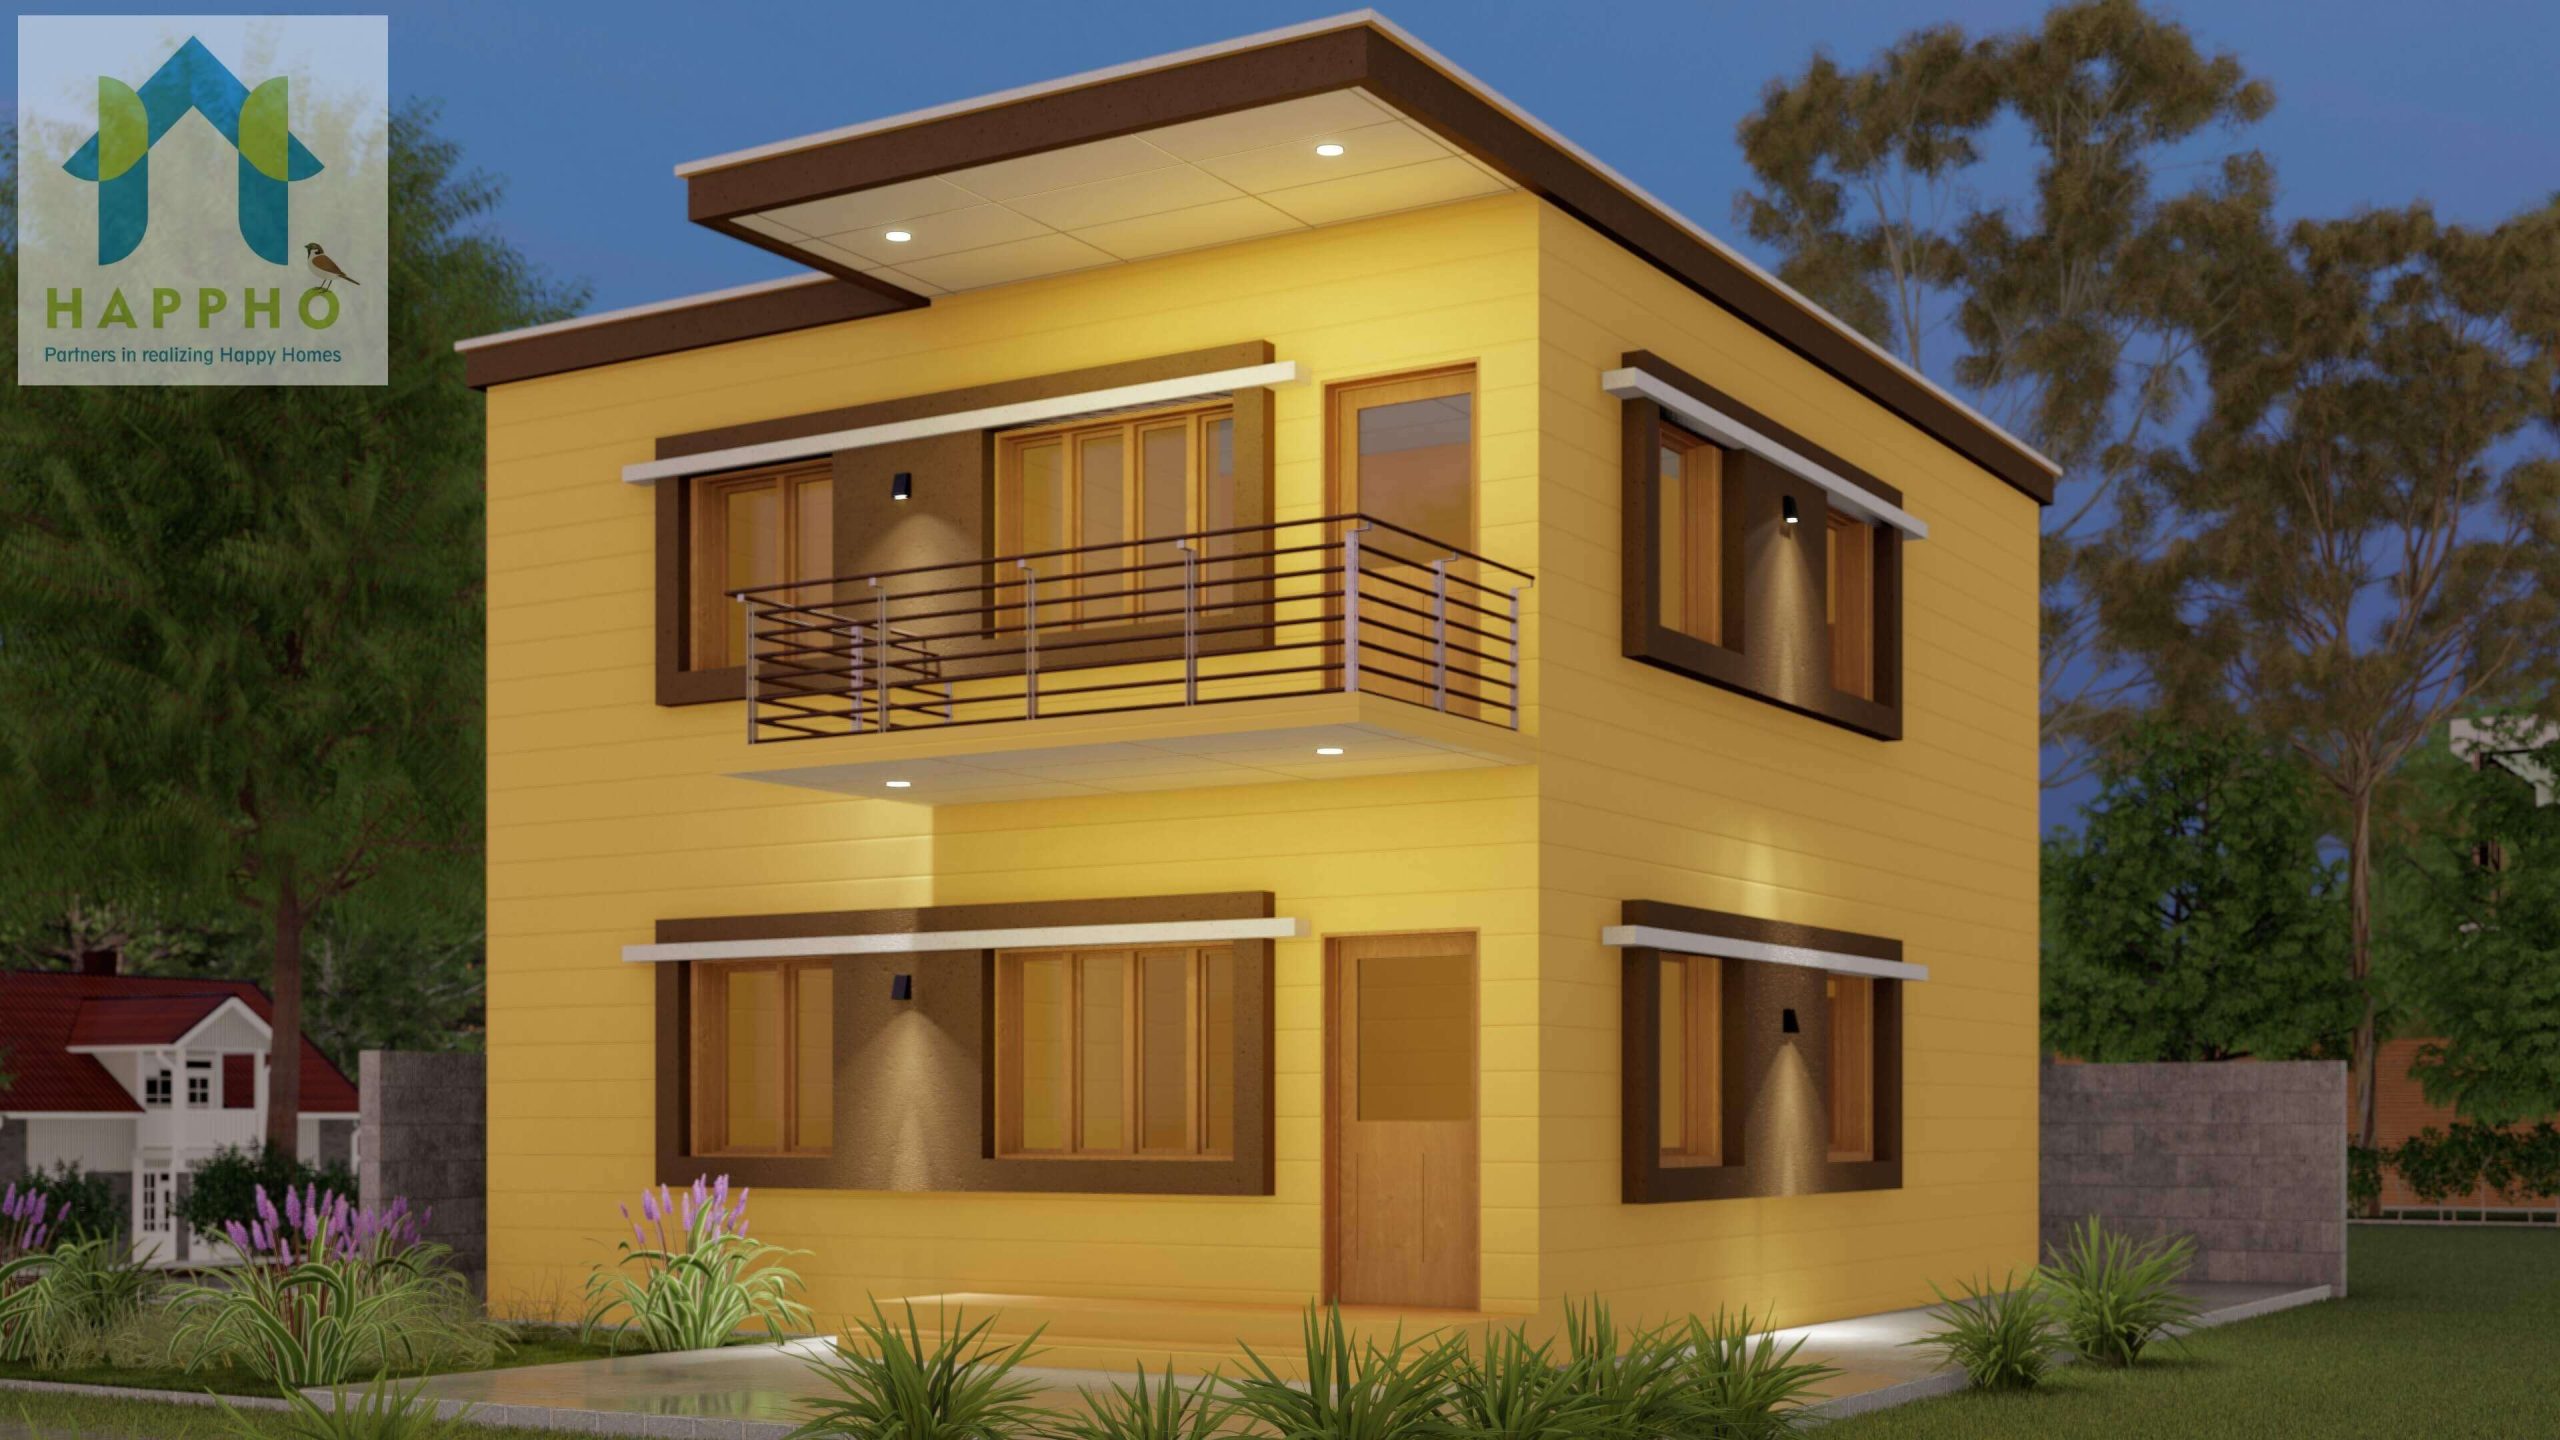 3d house design of duplex house plan for 3 bedroom house in yellow color